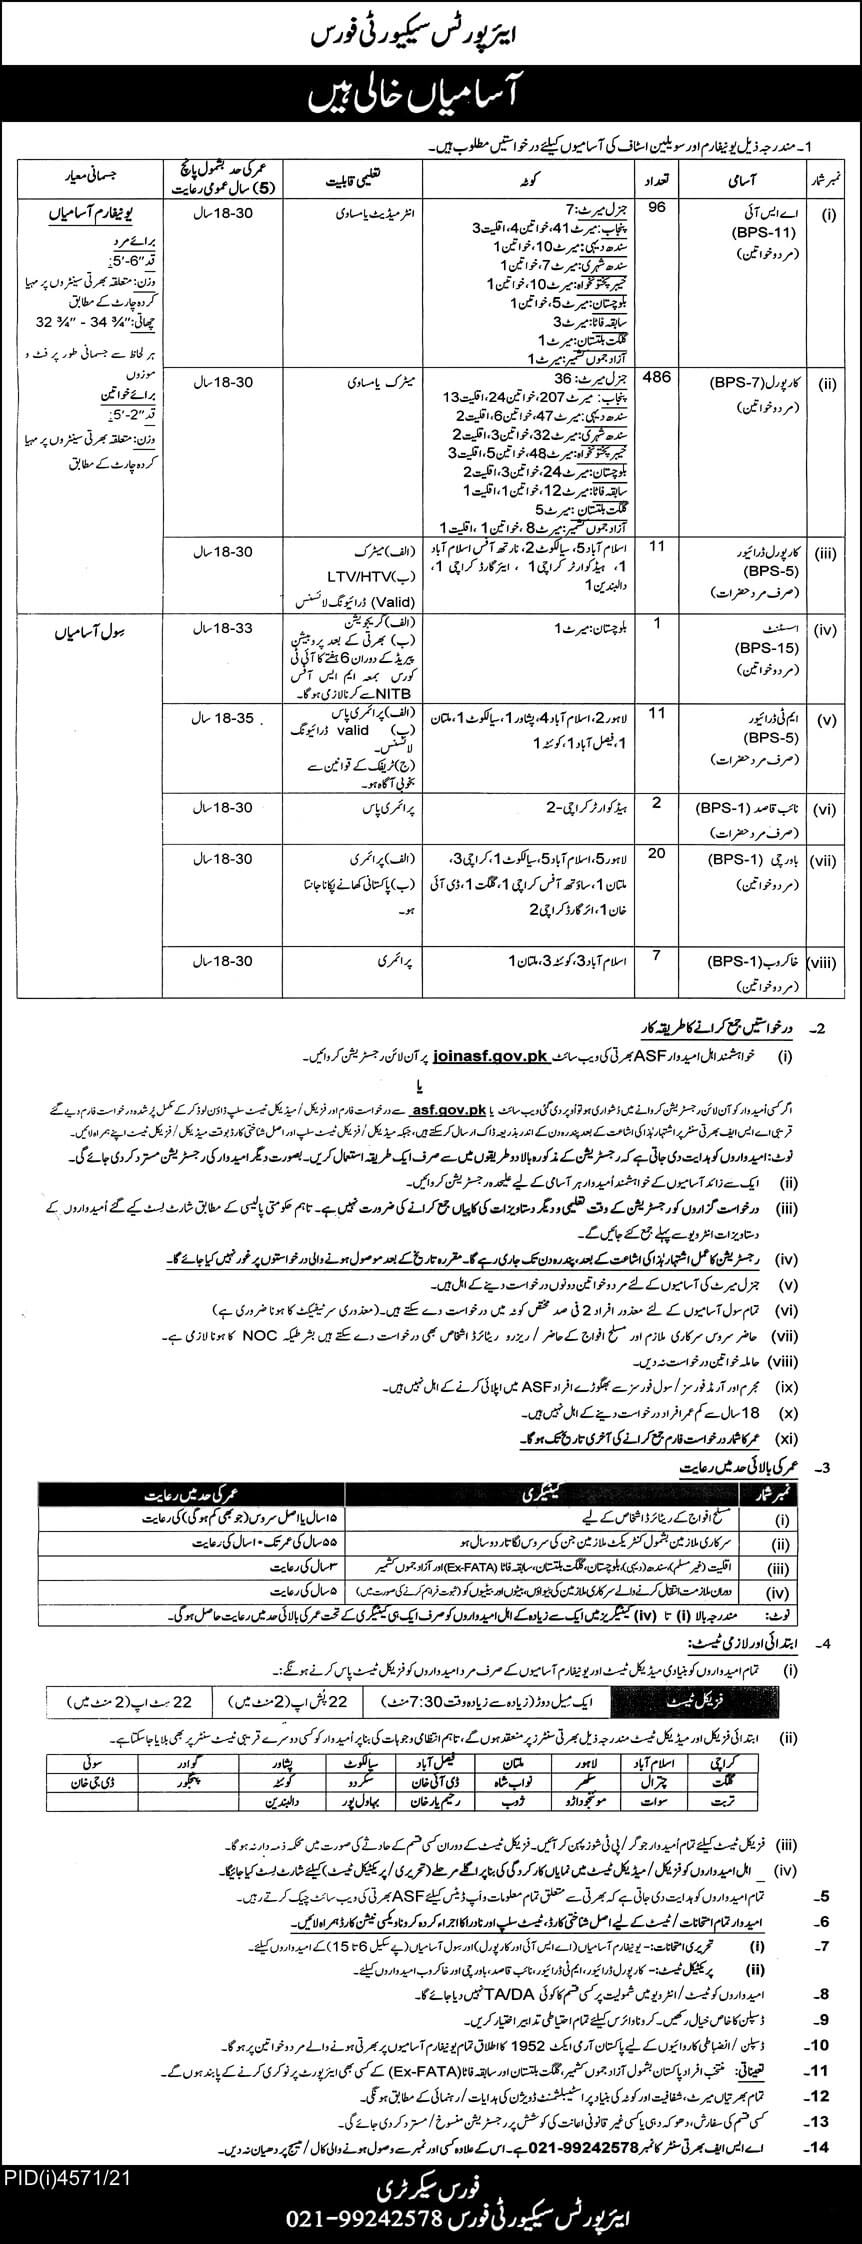 Airport Security Force ASF Jobs Jan 2022 | Joinasf.gov.pk Jobs